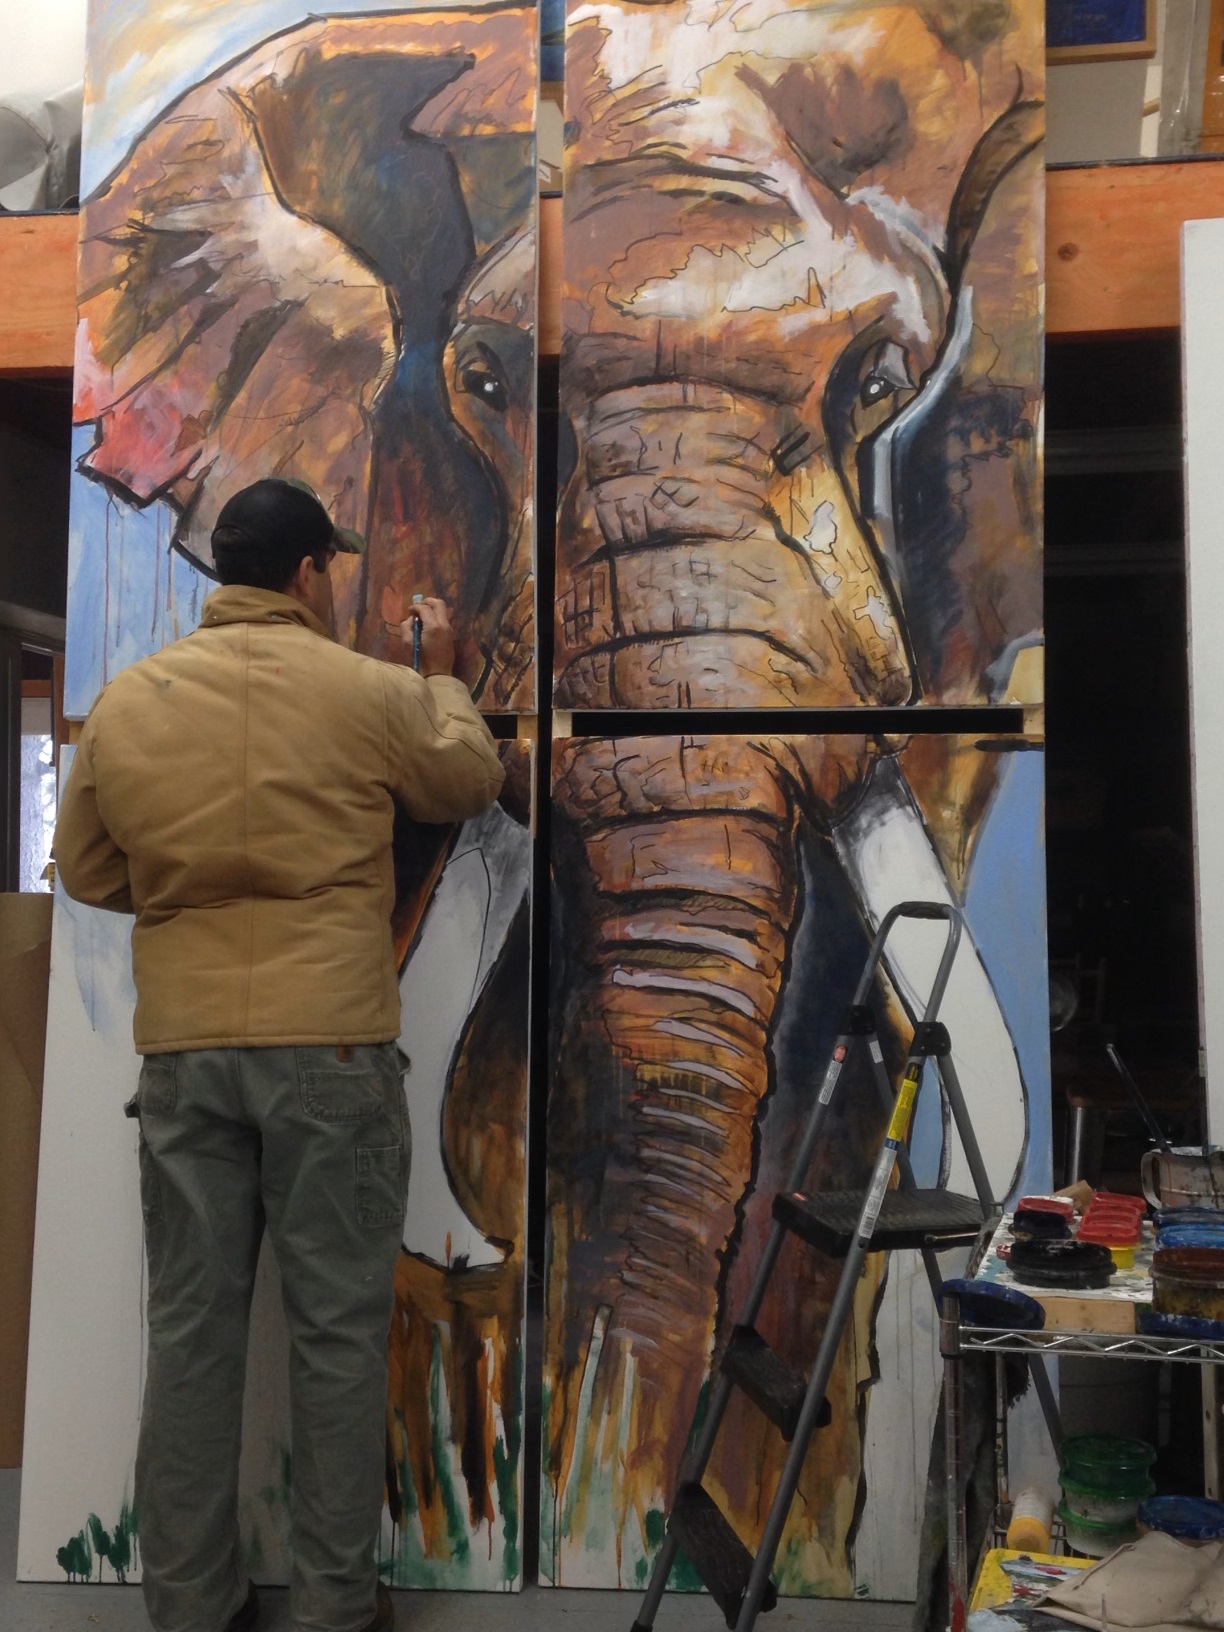 Ed Anderson painting a mural of an elephant